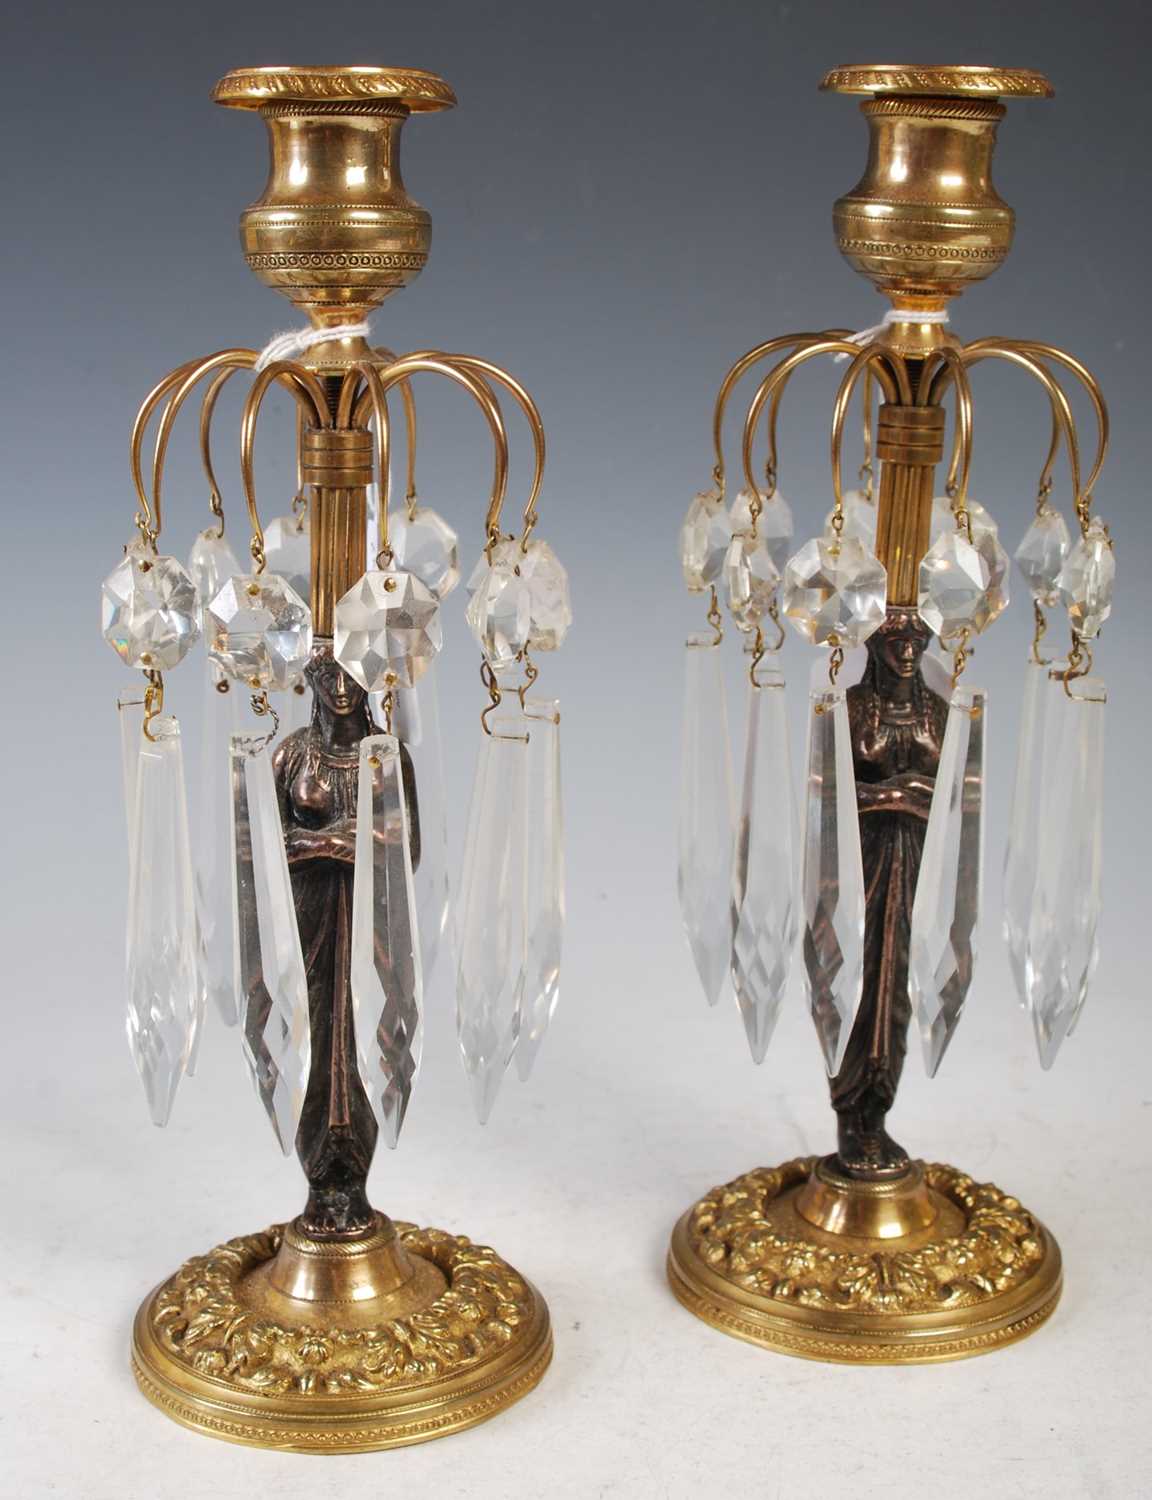 A pair of 19th century Regency style gilt metal and cut glass lustre candlesticks, each with